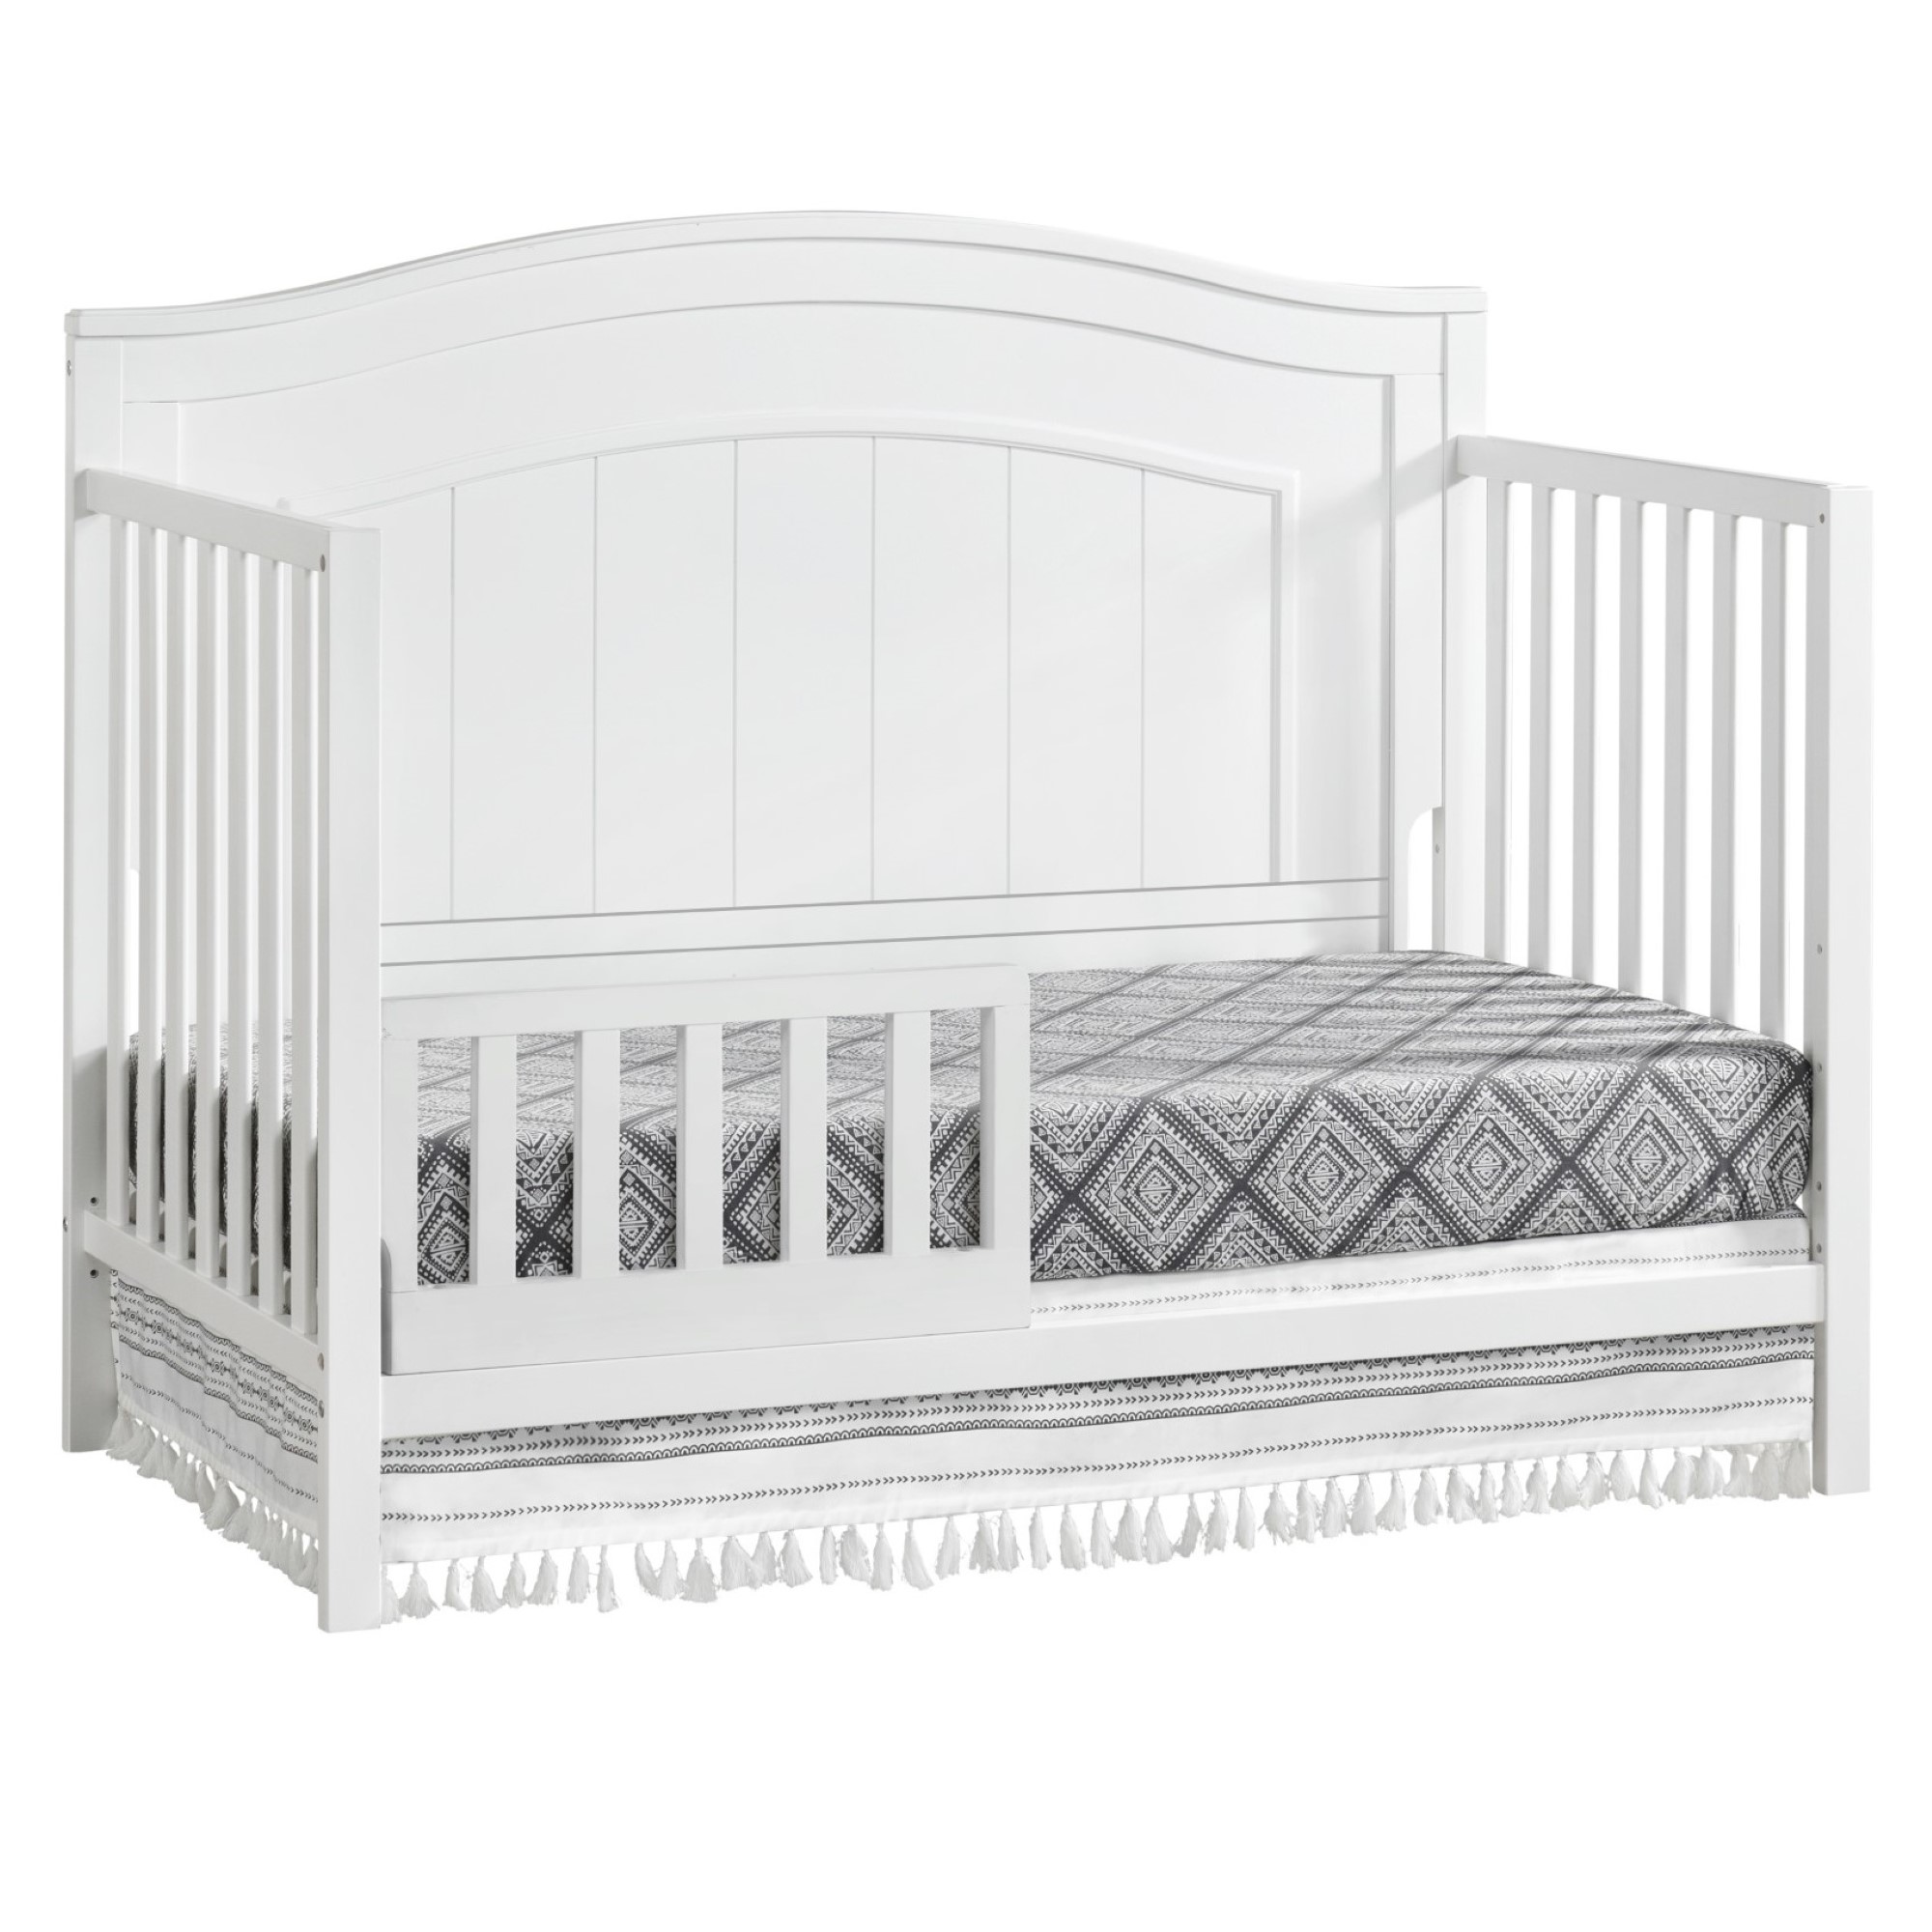 Oxford Baby North Bay 4-in-1 Convertible Crib, Snow White, GREENGUARD Gold Certified, Wooden Crib - image 2 of 4